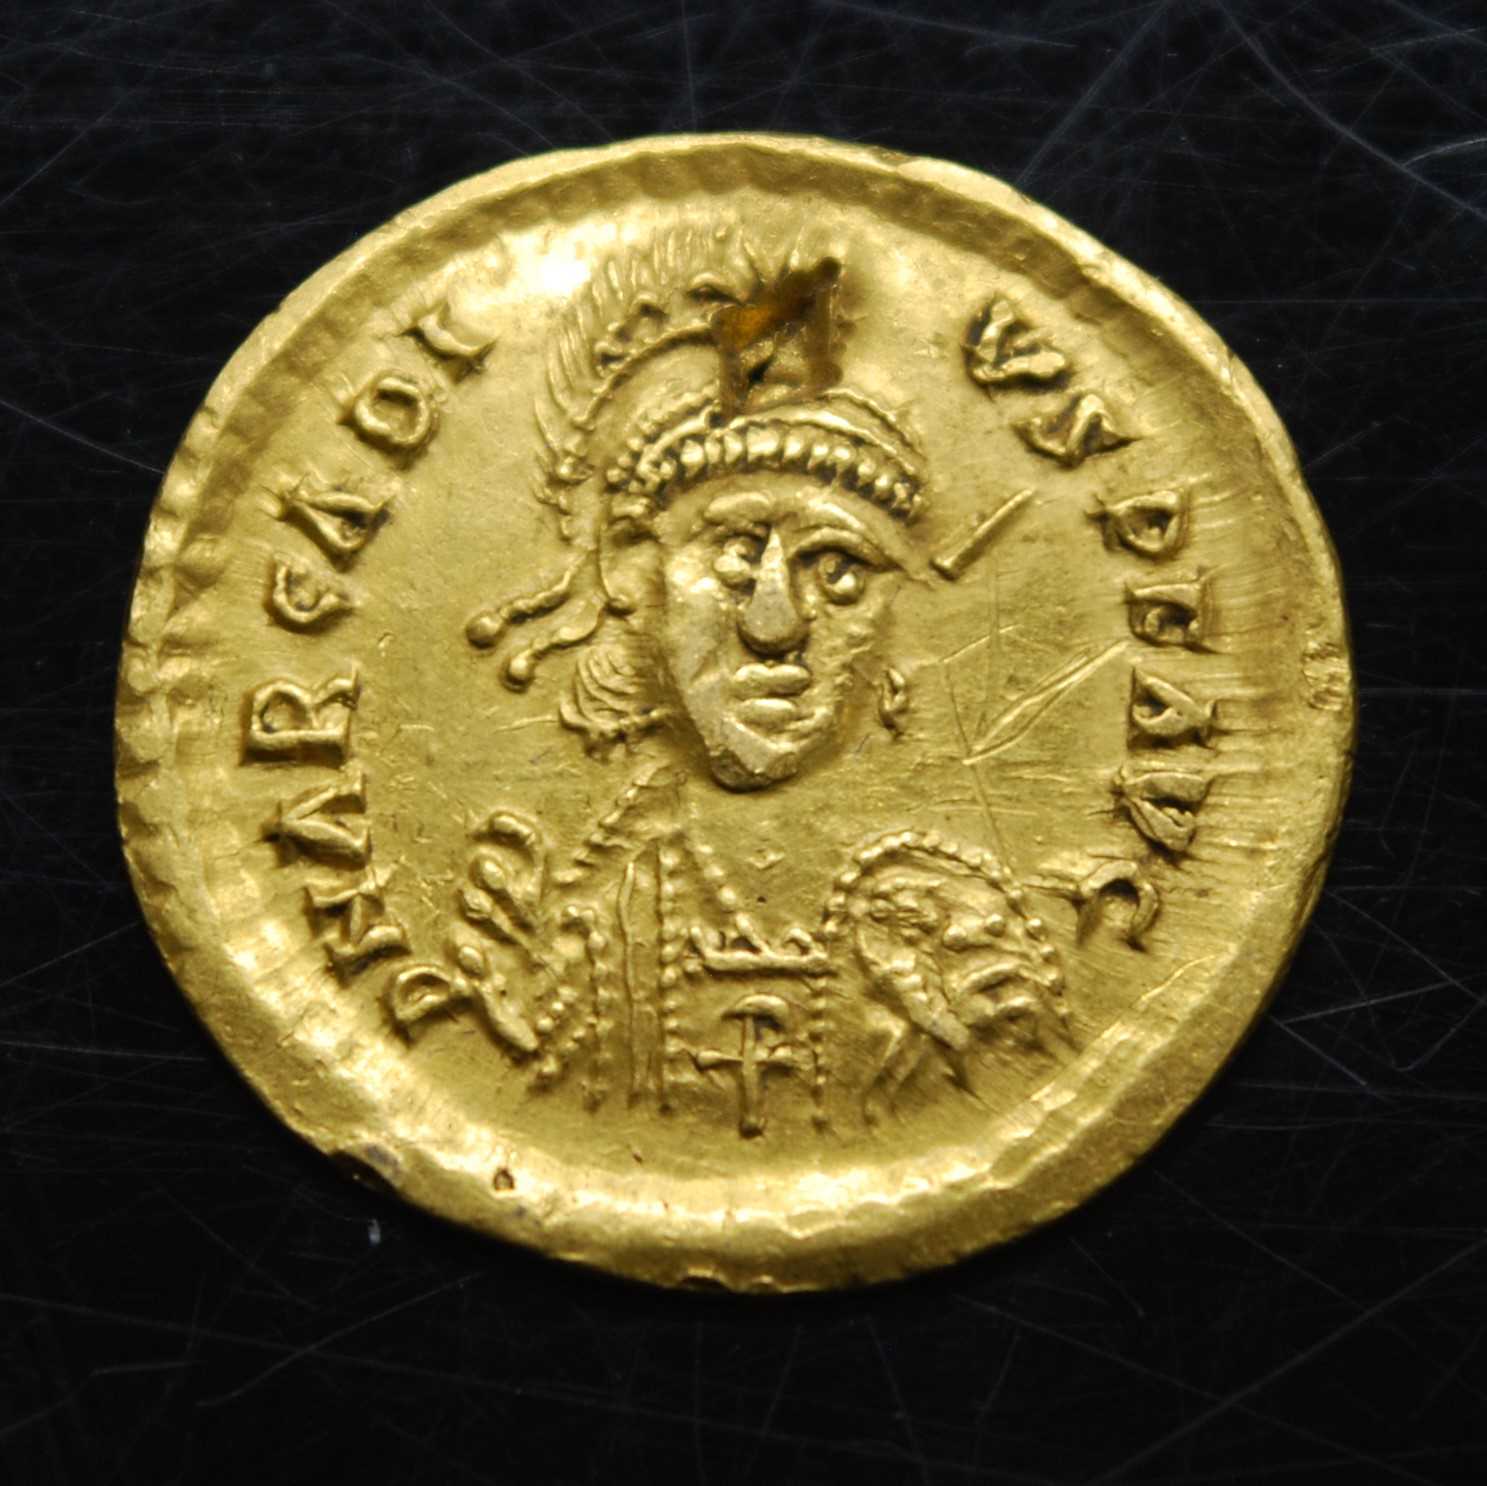 Western Roman Empire, Honorius (AD 393-423) gold solidus, obv; bust of Honorius, helmeted, shield - Image 2 of 3